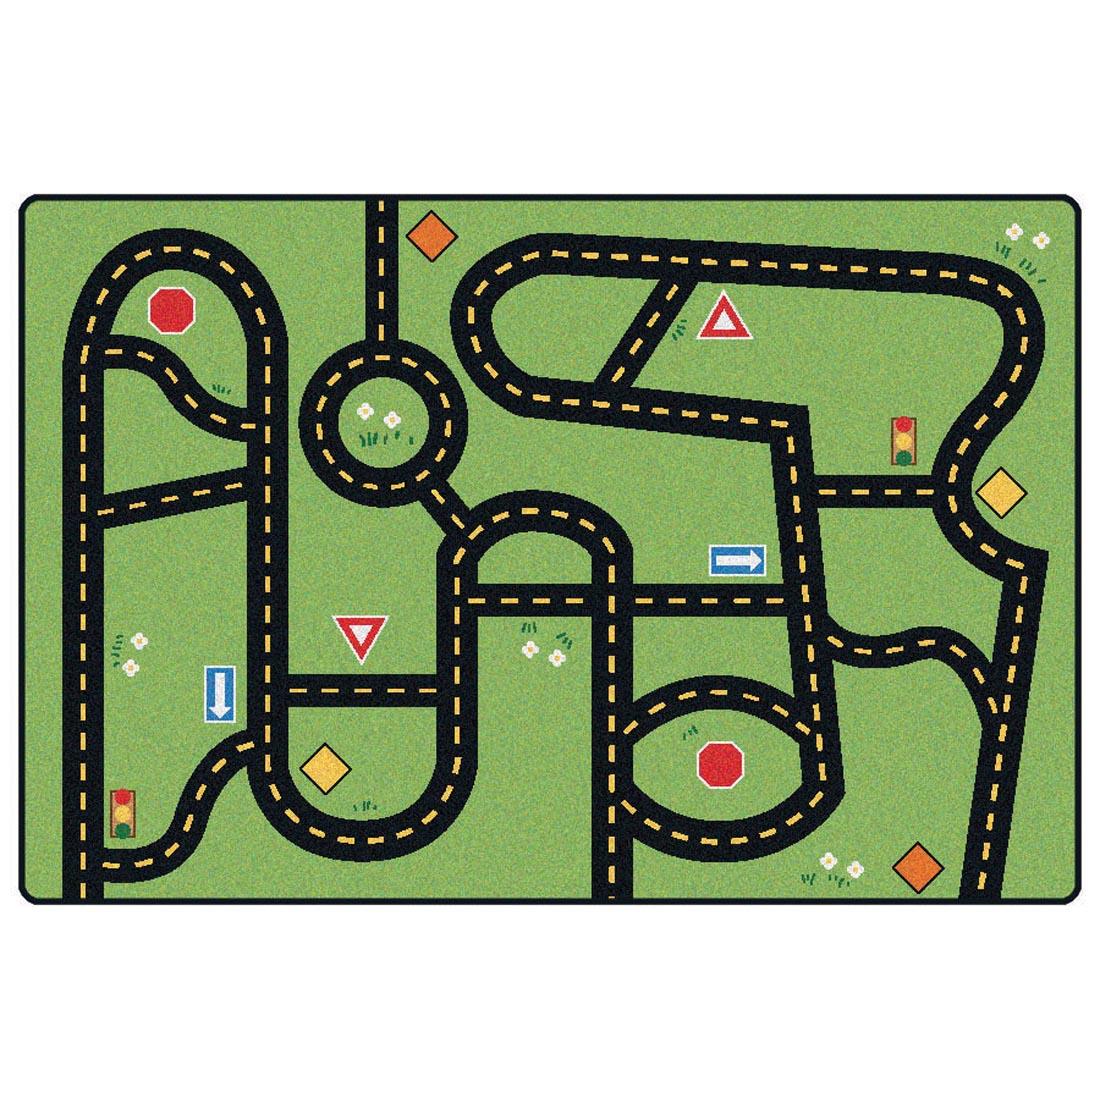 Drive & Play Accent Rug by Carpets For Kids has roads and street signs